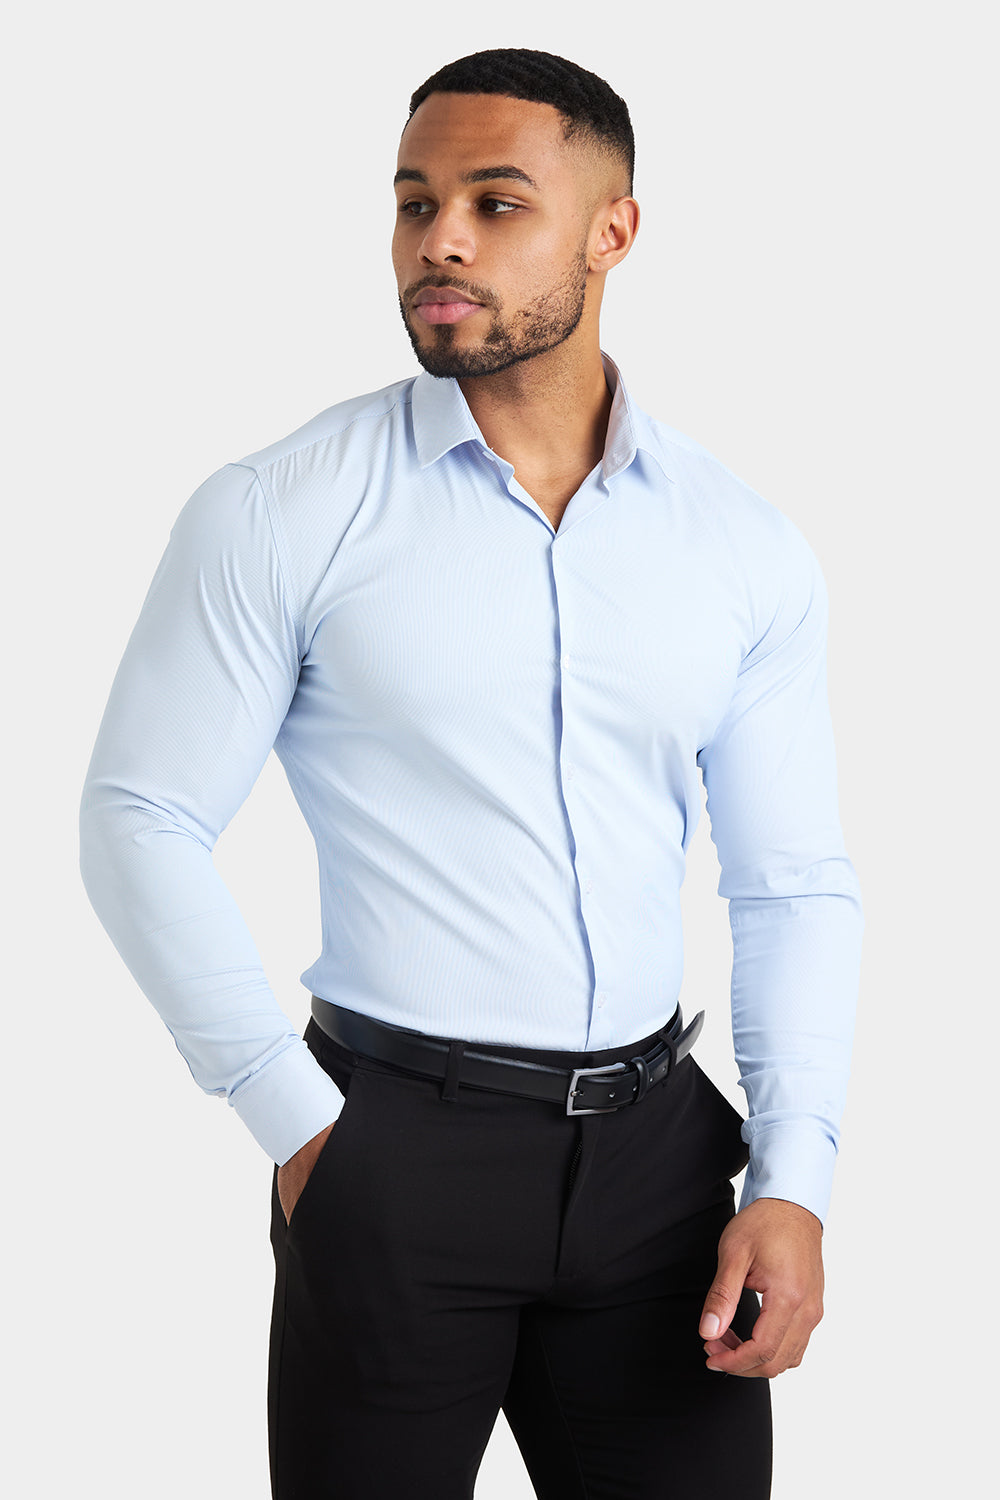 Performance Business Shirt in Blue Fine Stripe - TAILORED ATHLETE - ROW